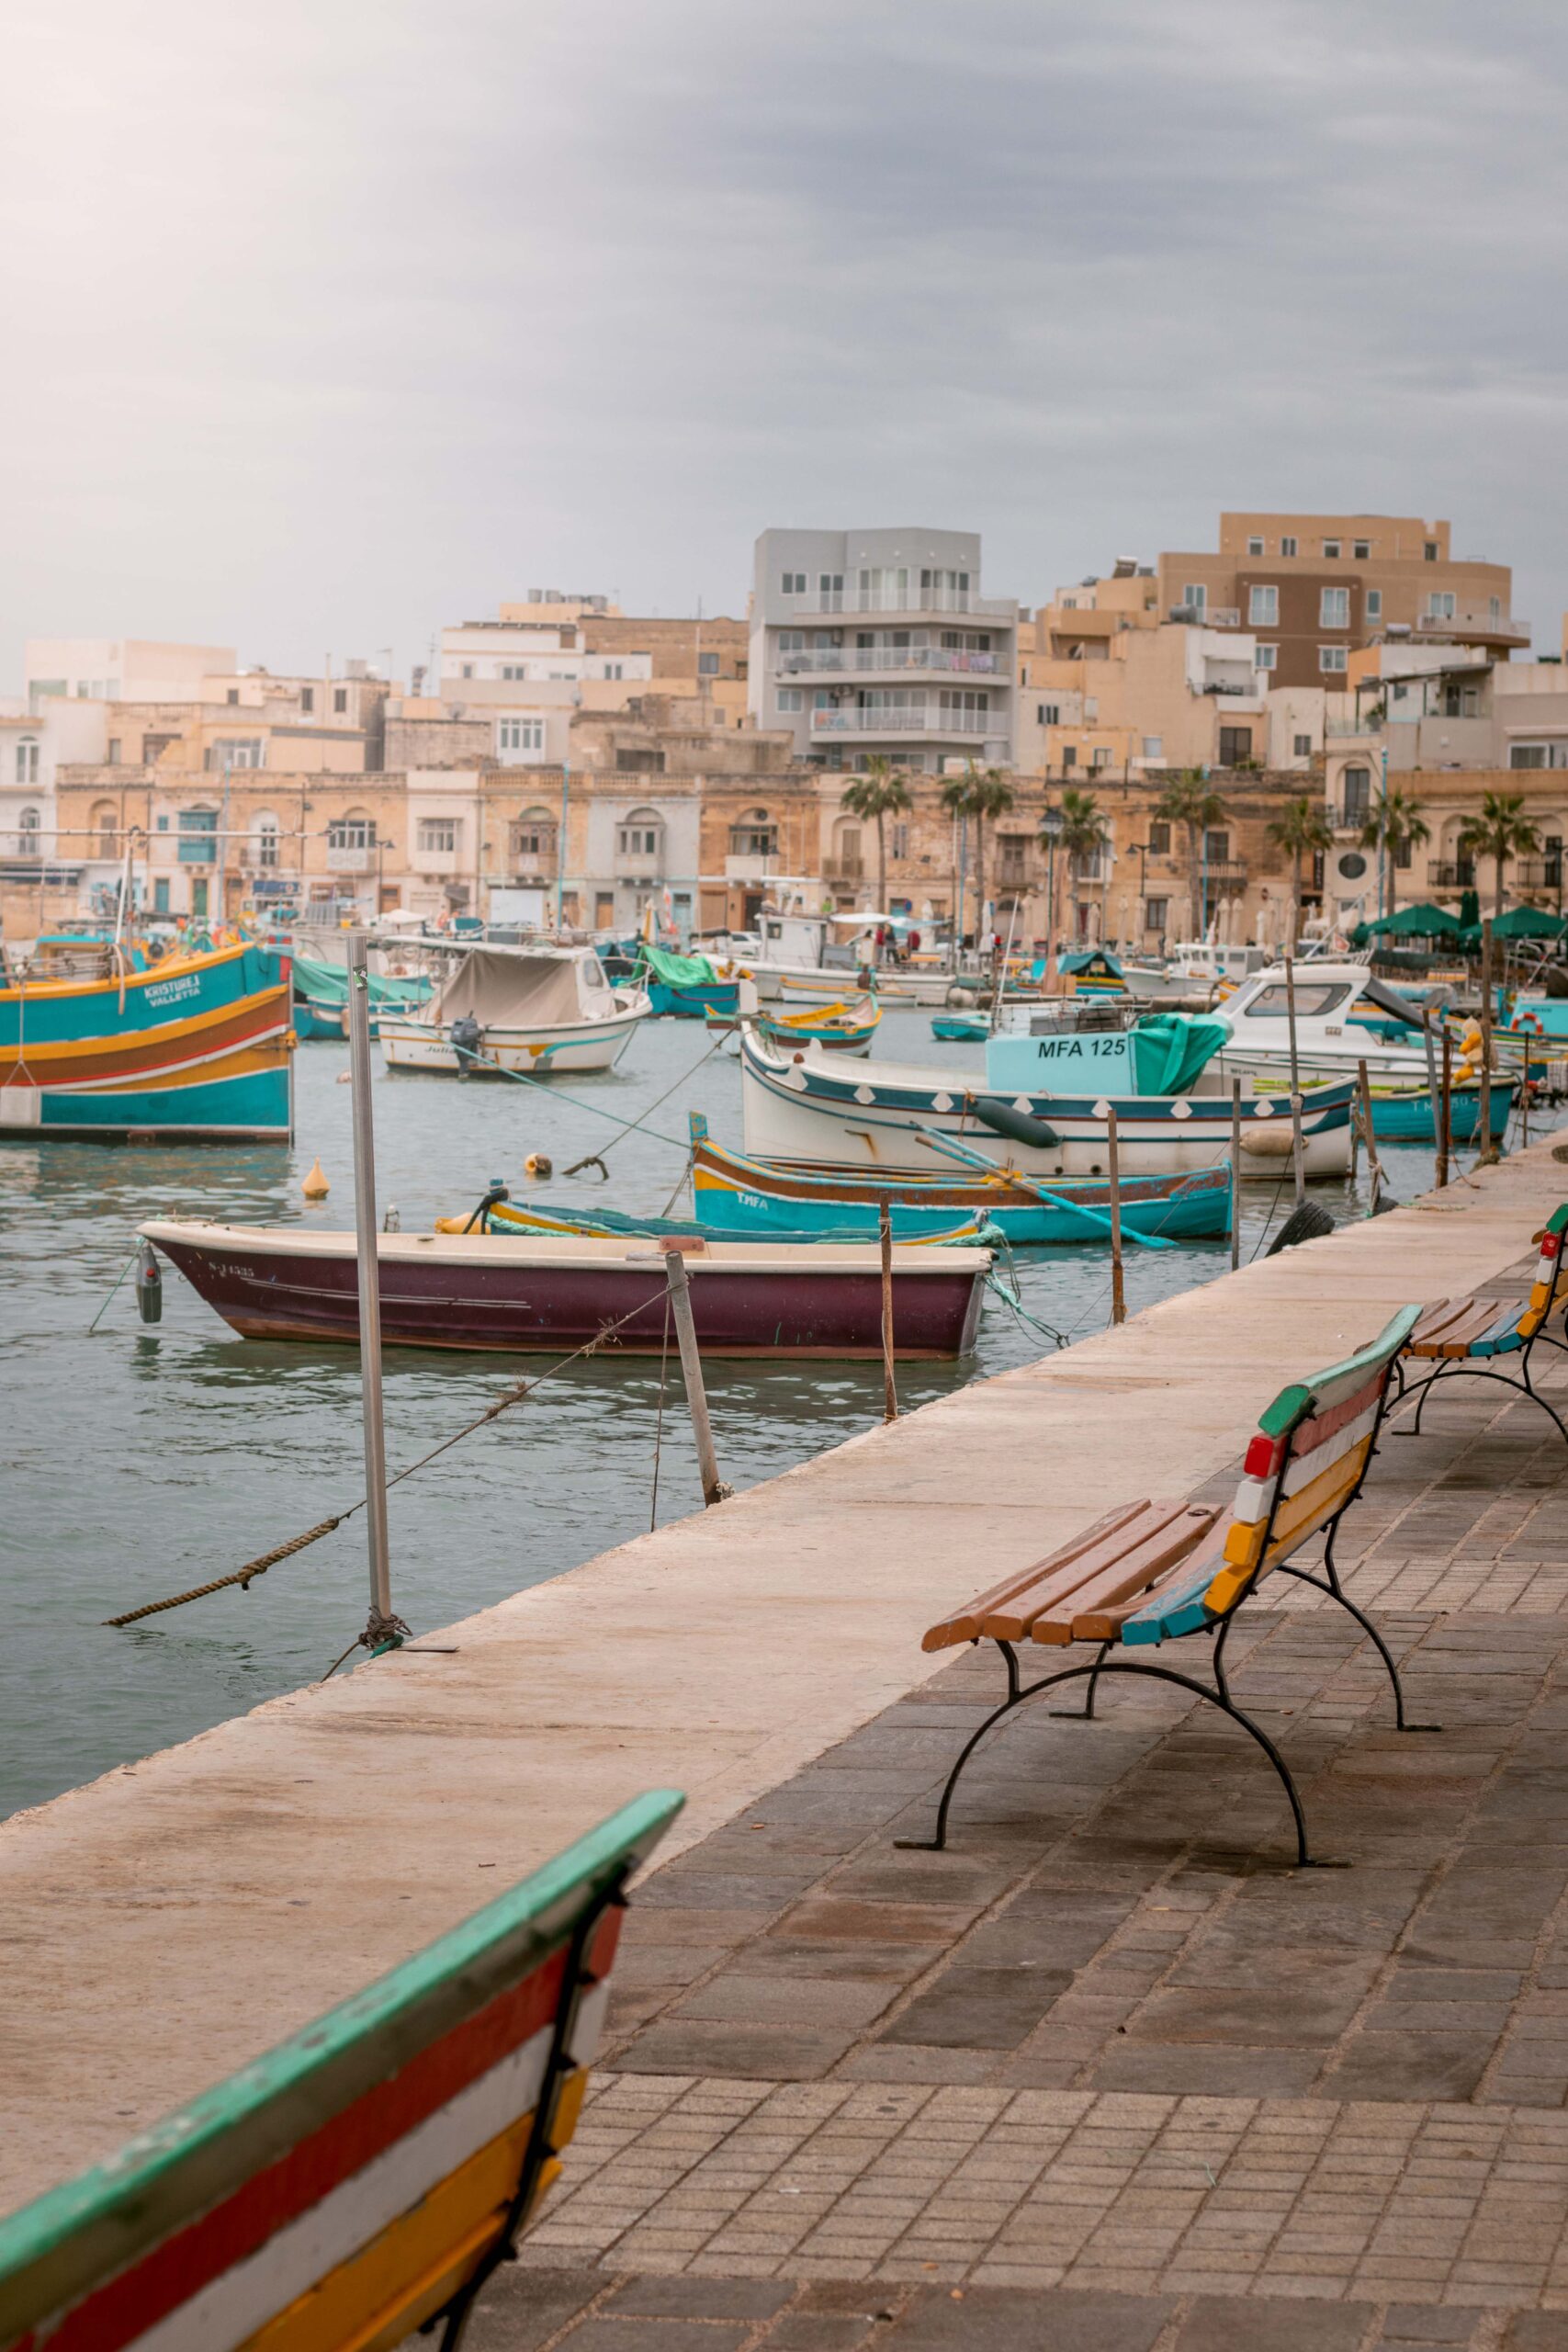 Colourful benches and traditional luzzu boats in Marsaxlokk Harbour, Malta